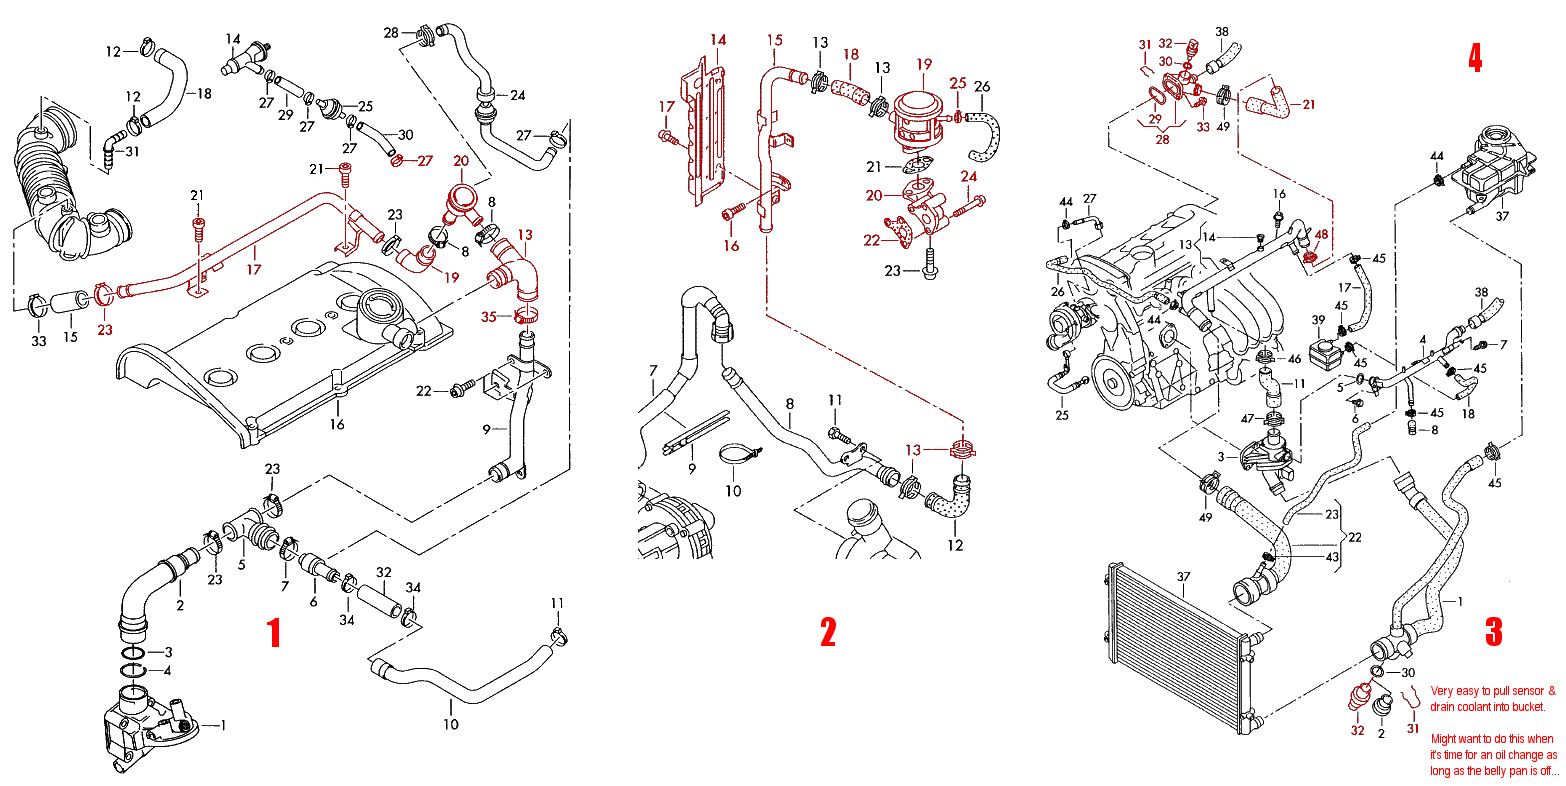 Diagram of parts to remove for coolant flange repair